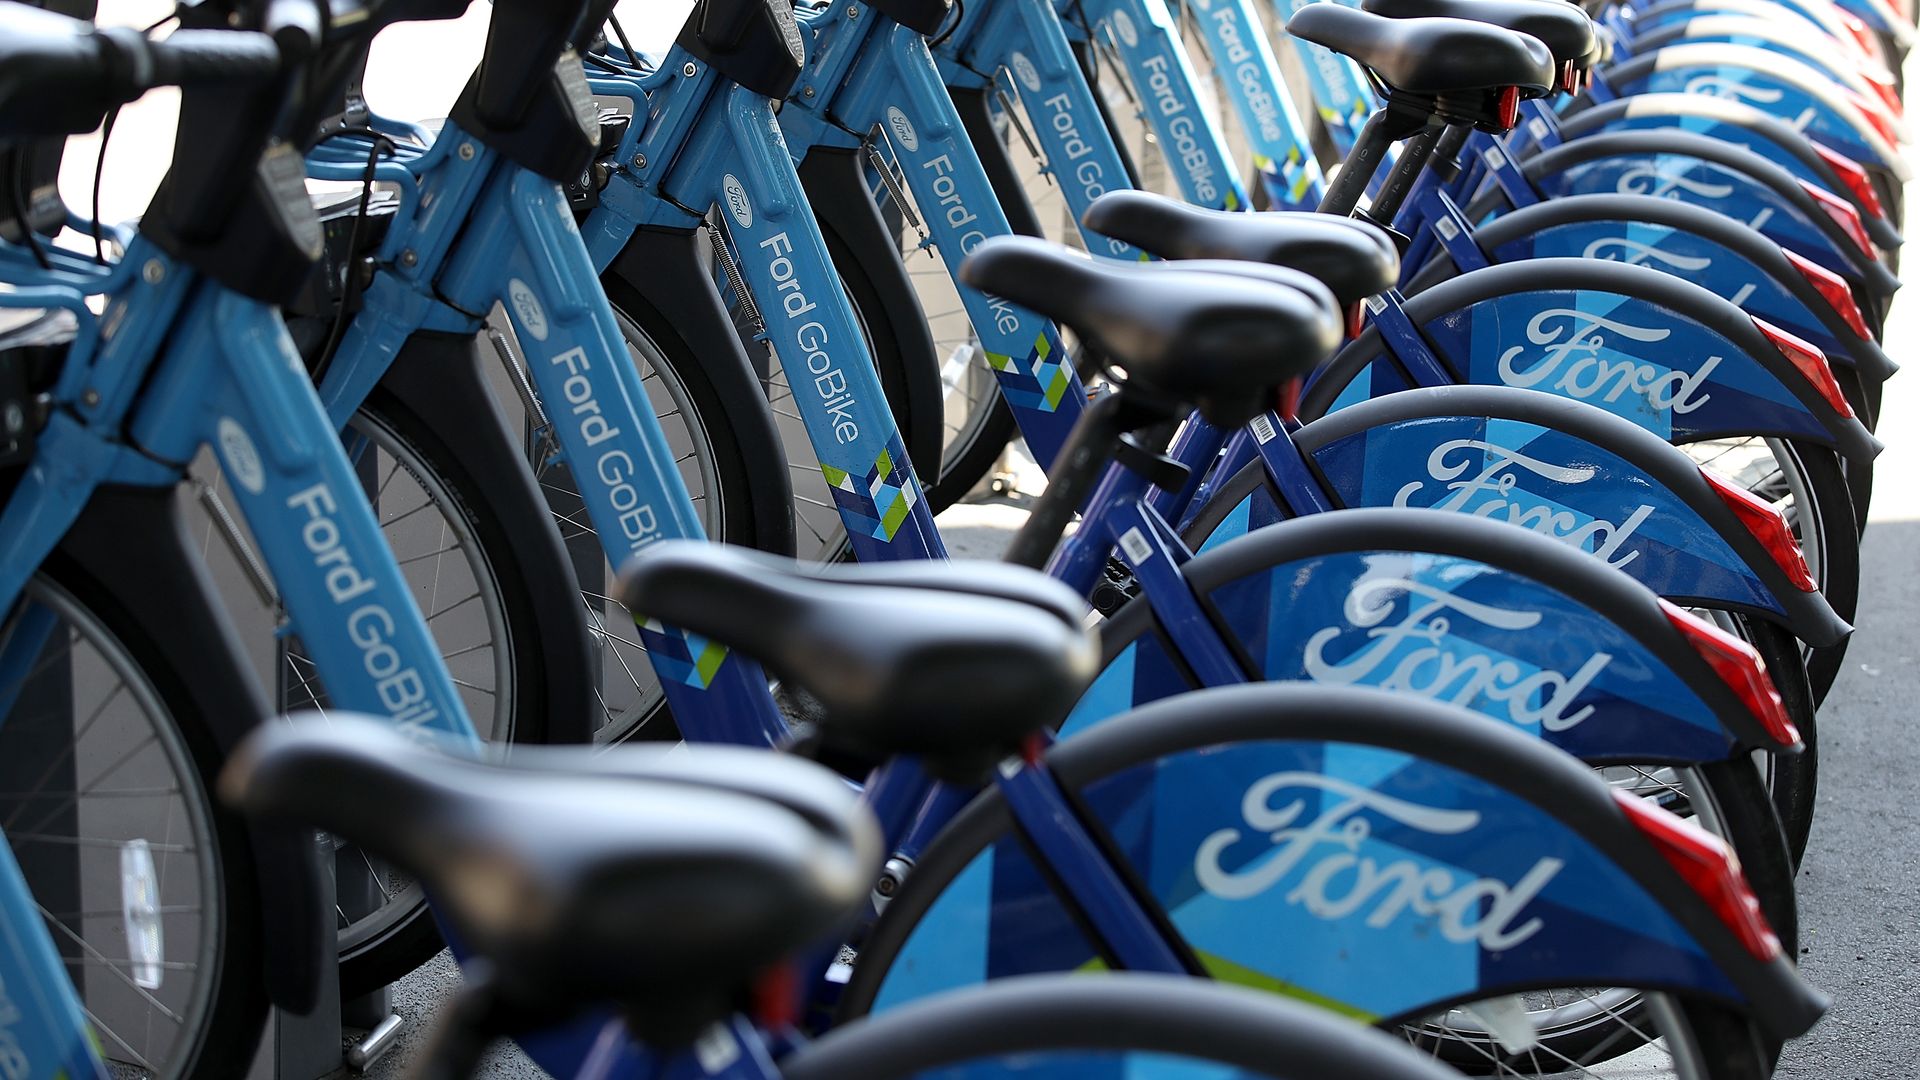 Ford Go Bikes lined up in San Francisco